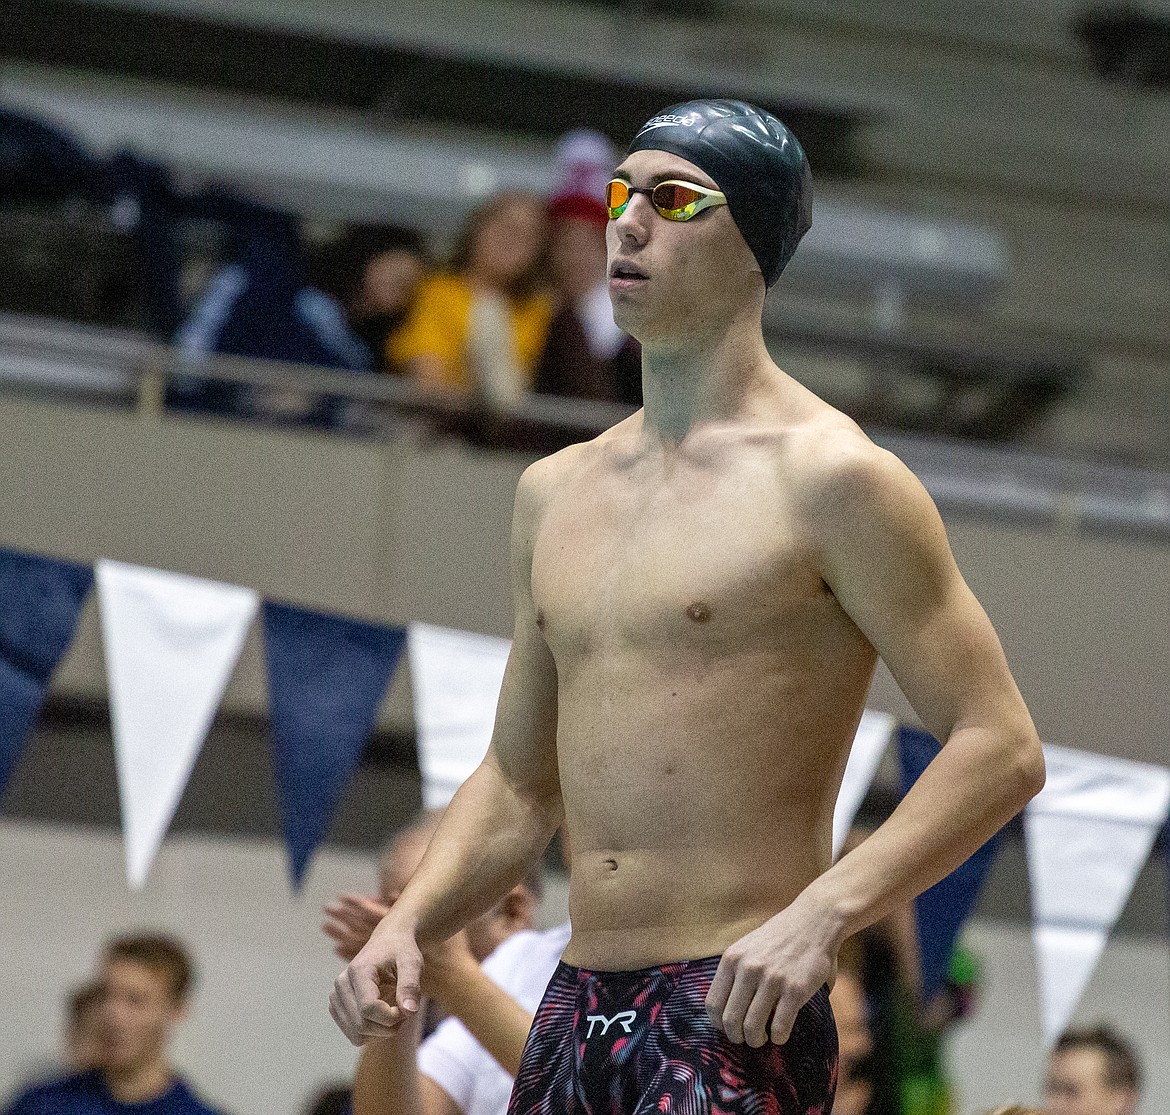 Moses Lake junior Zachary Washburn gets set for the 100-yard freestyle finals on Saturday at King County Aquatic Center in Federal Way.